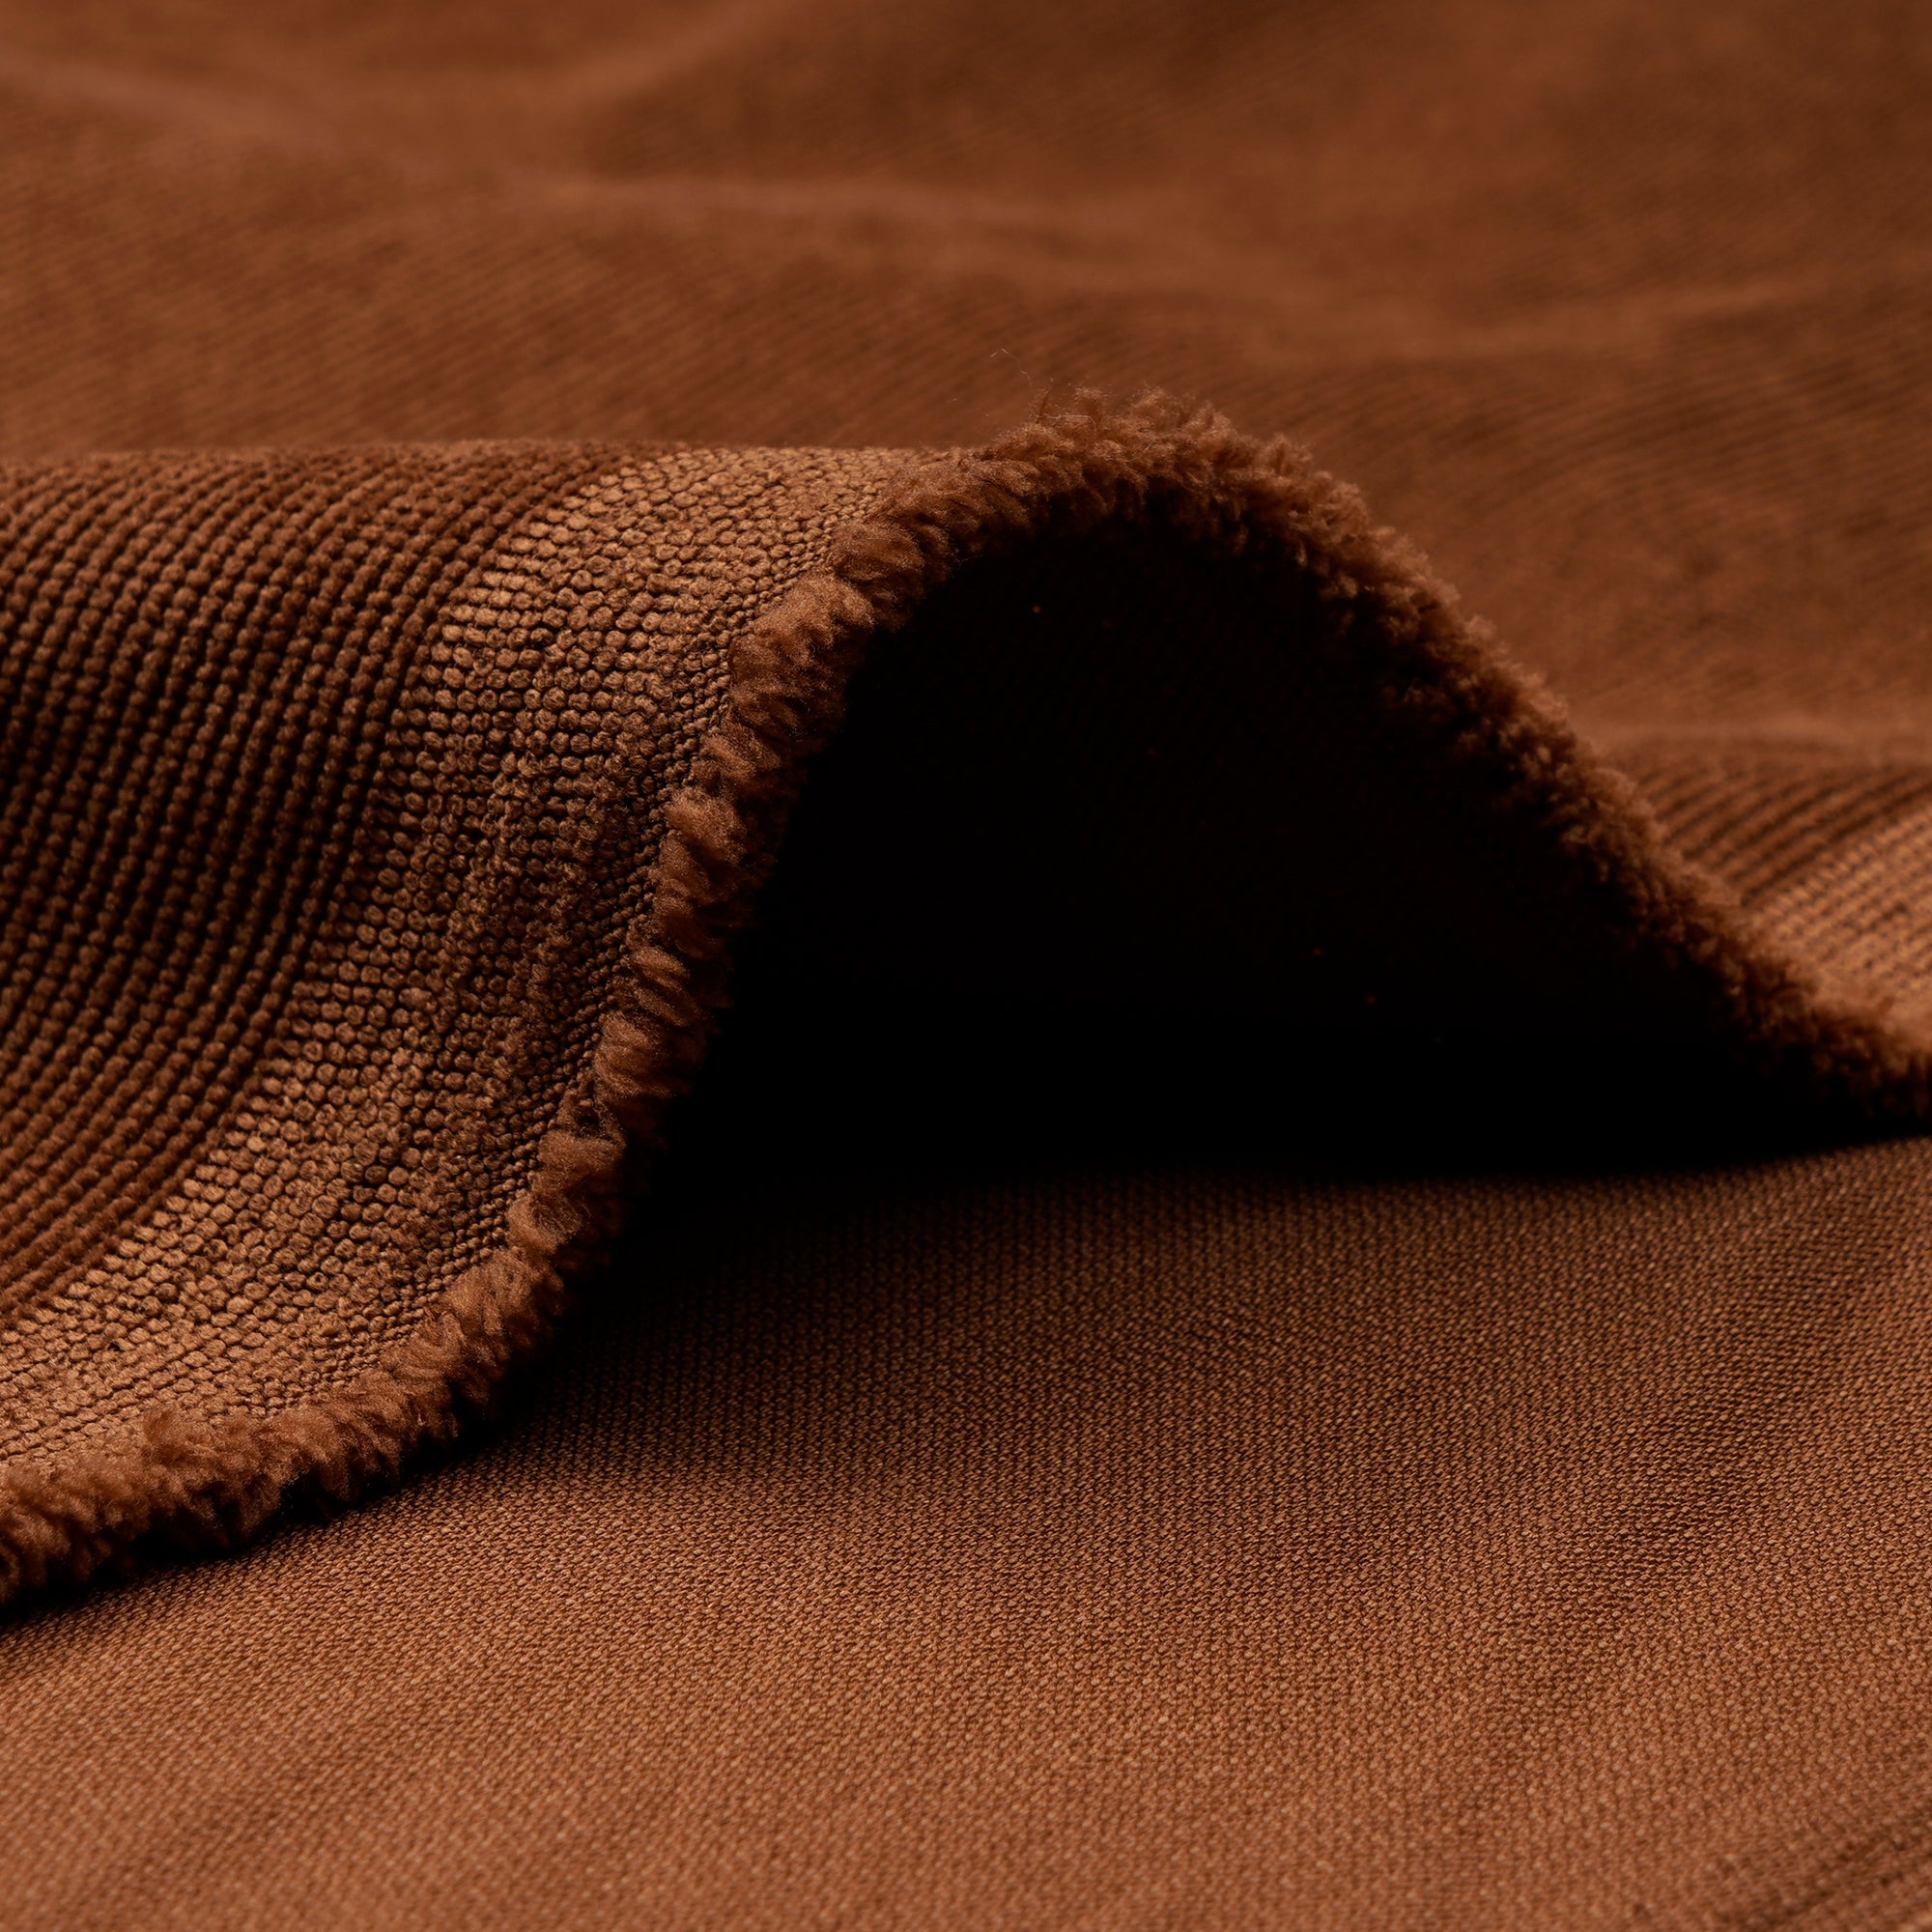 Sierra Imported Cotton Corduroy Fabric (60" Wide)